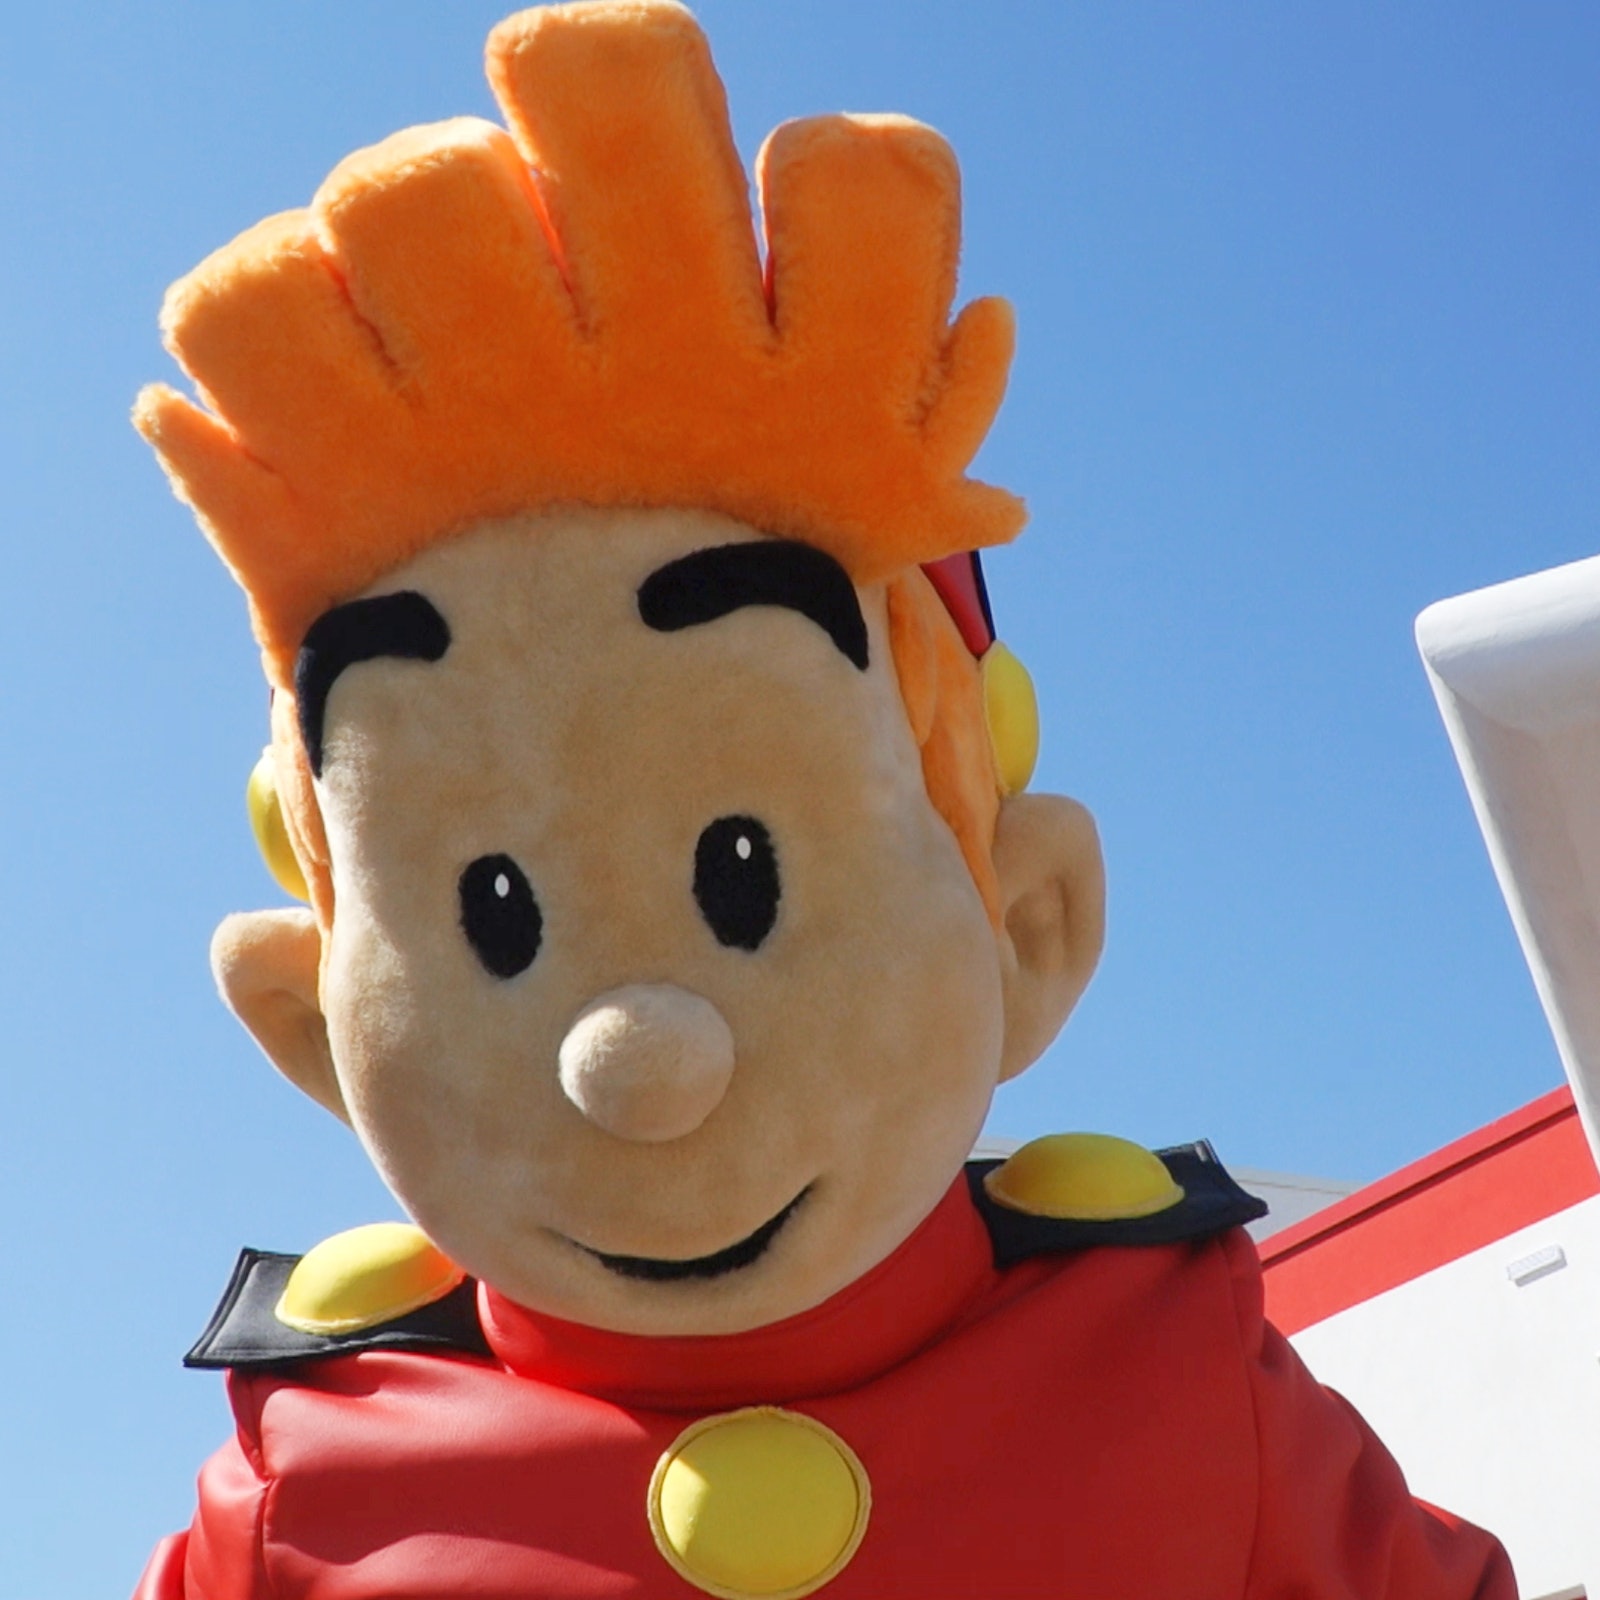 Parc Spirou Provence: Fast Track in France